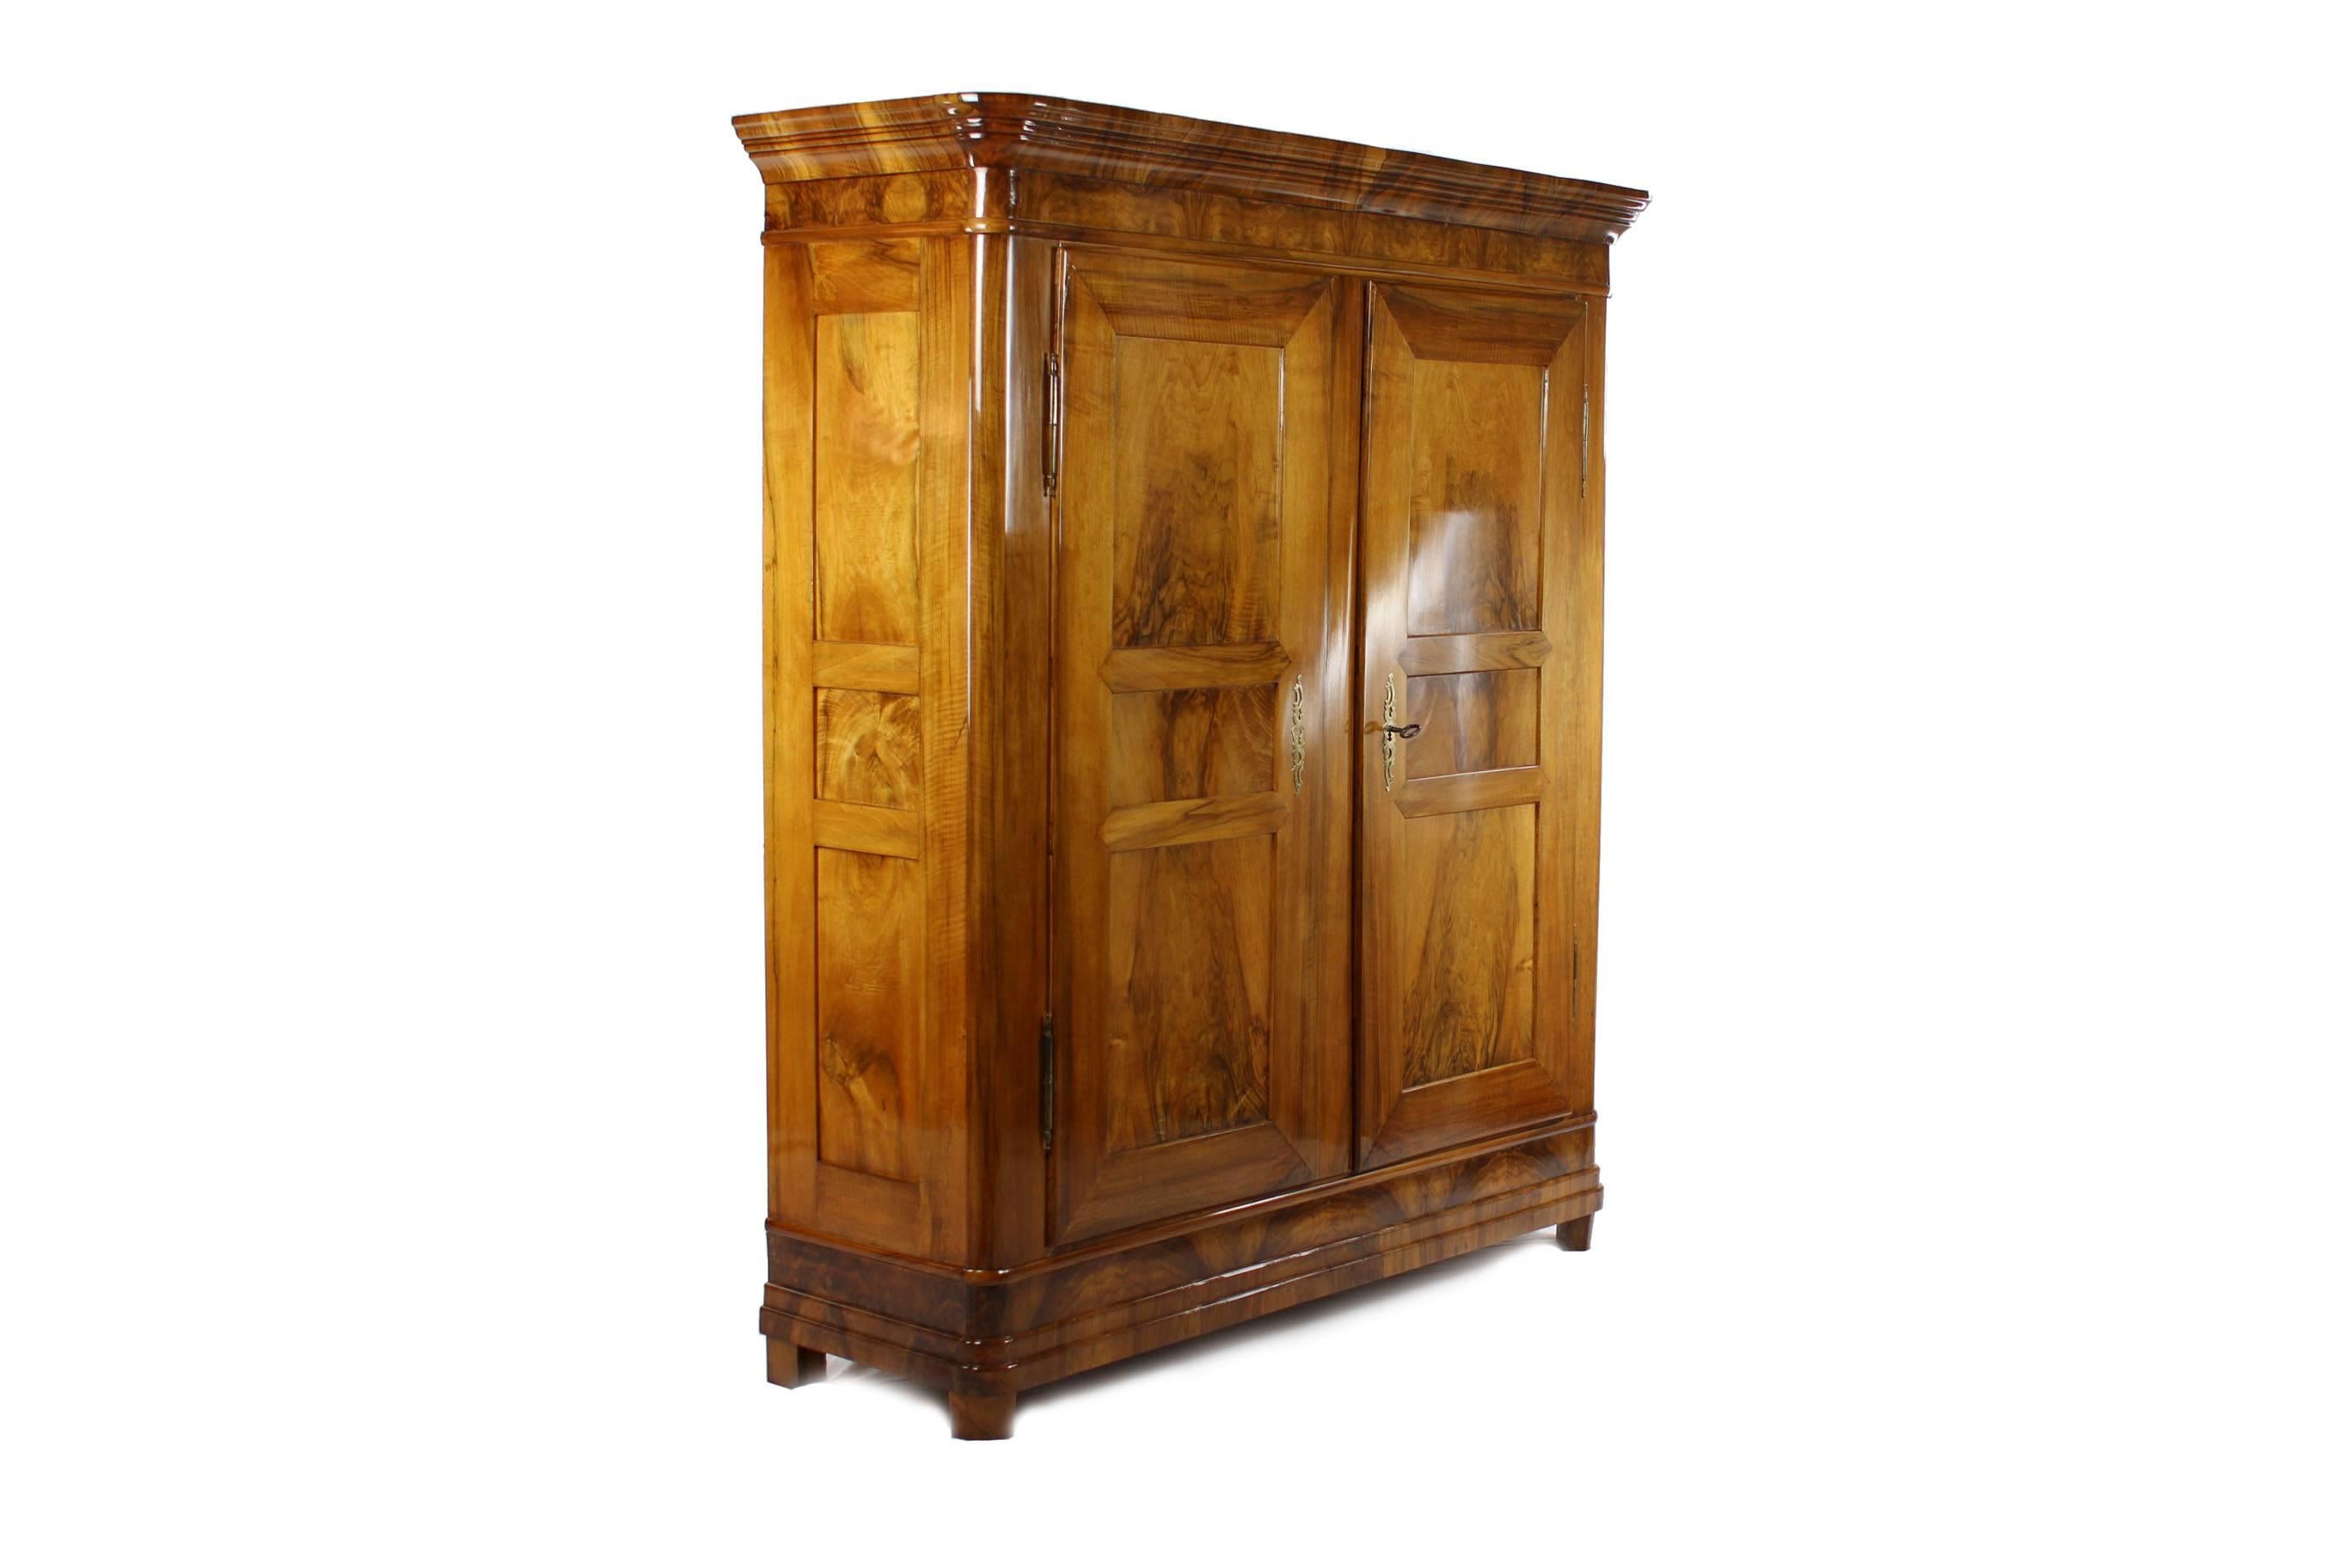 Walnut massively and veneered.
Biedermeier period about 1820-1825.
Divisible.
Two-door,
Nicely reflected veneer.
Inside equipped with shelves.
Restored residential-ready state.
Shellac polish.
Measures: Height 216 cm, width 190 cm (body 178